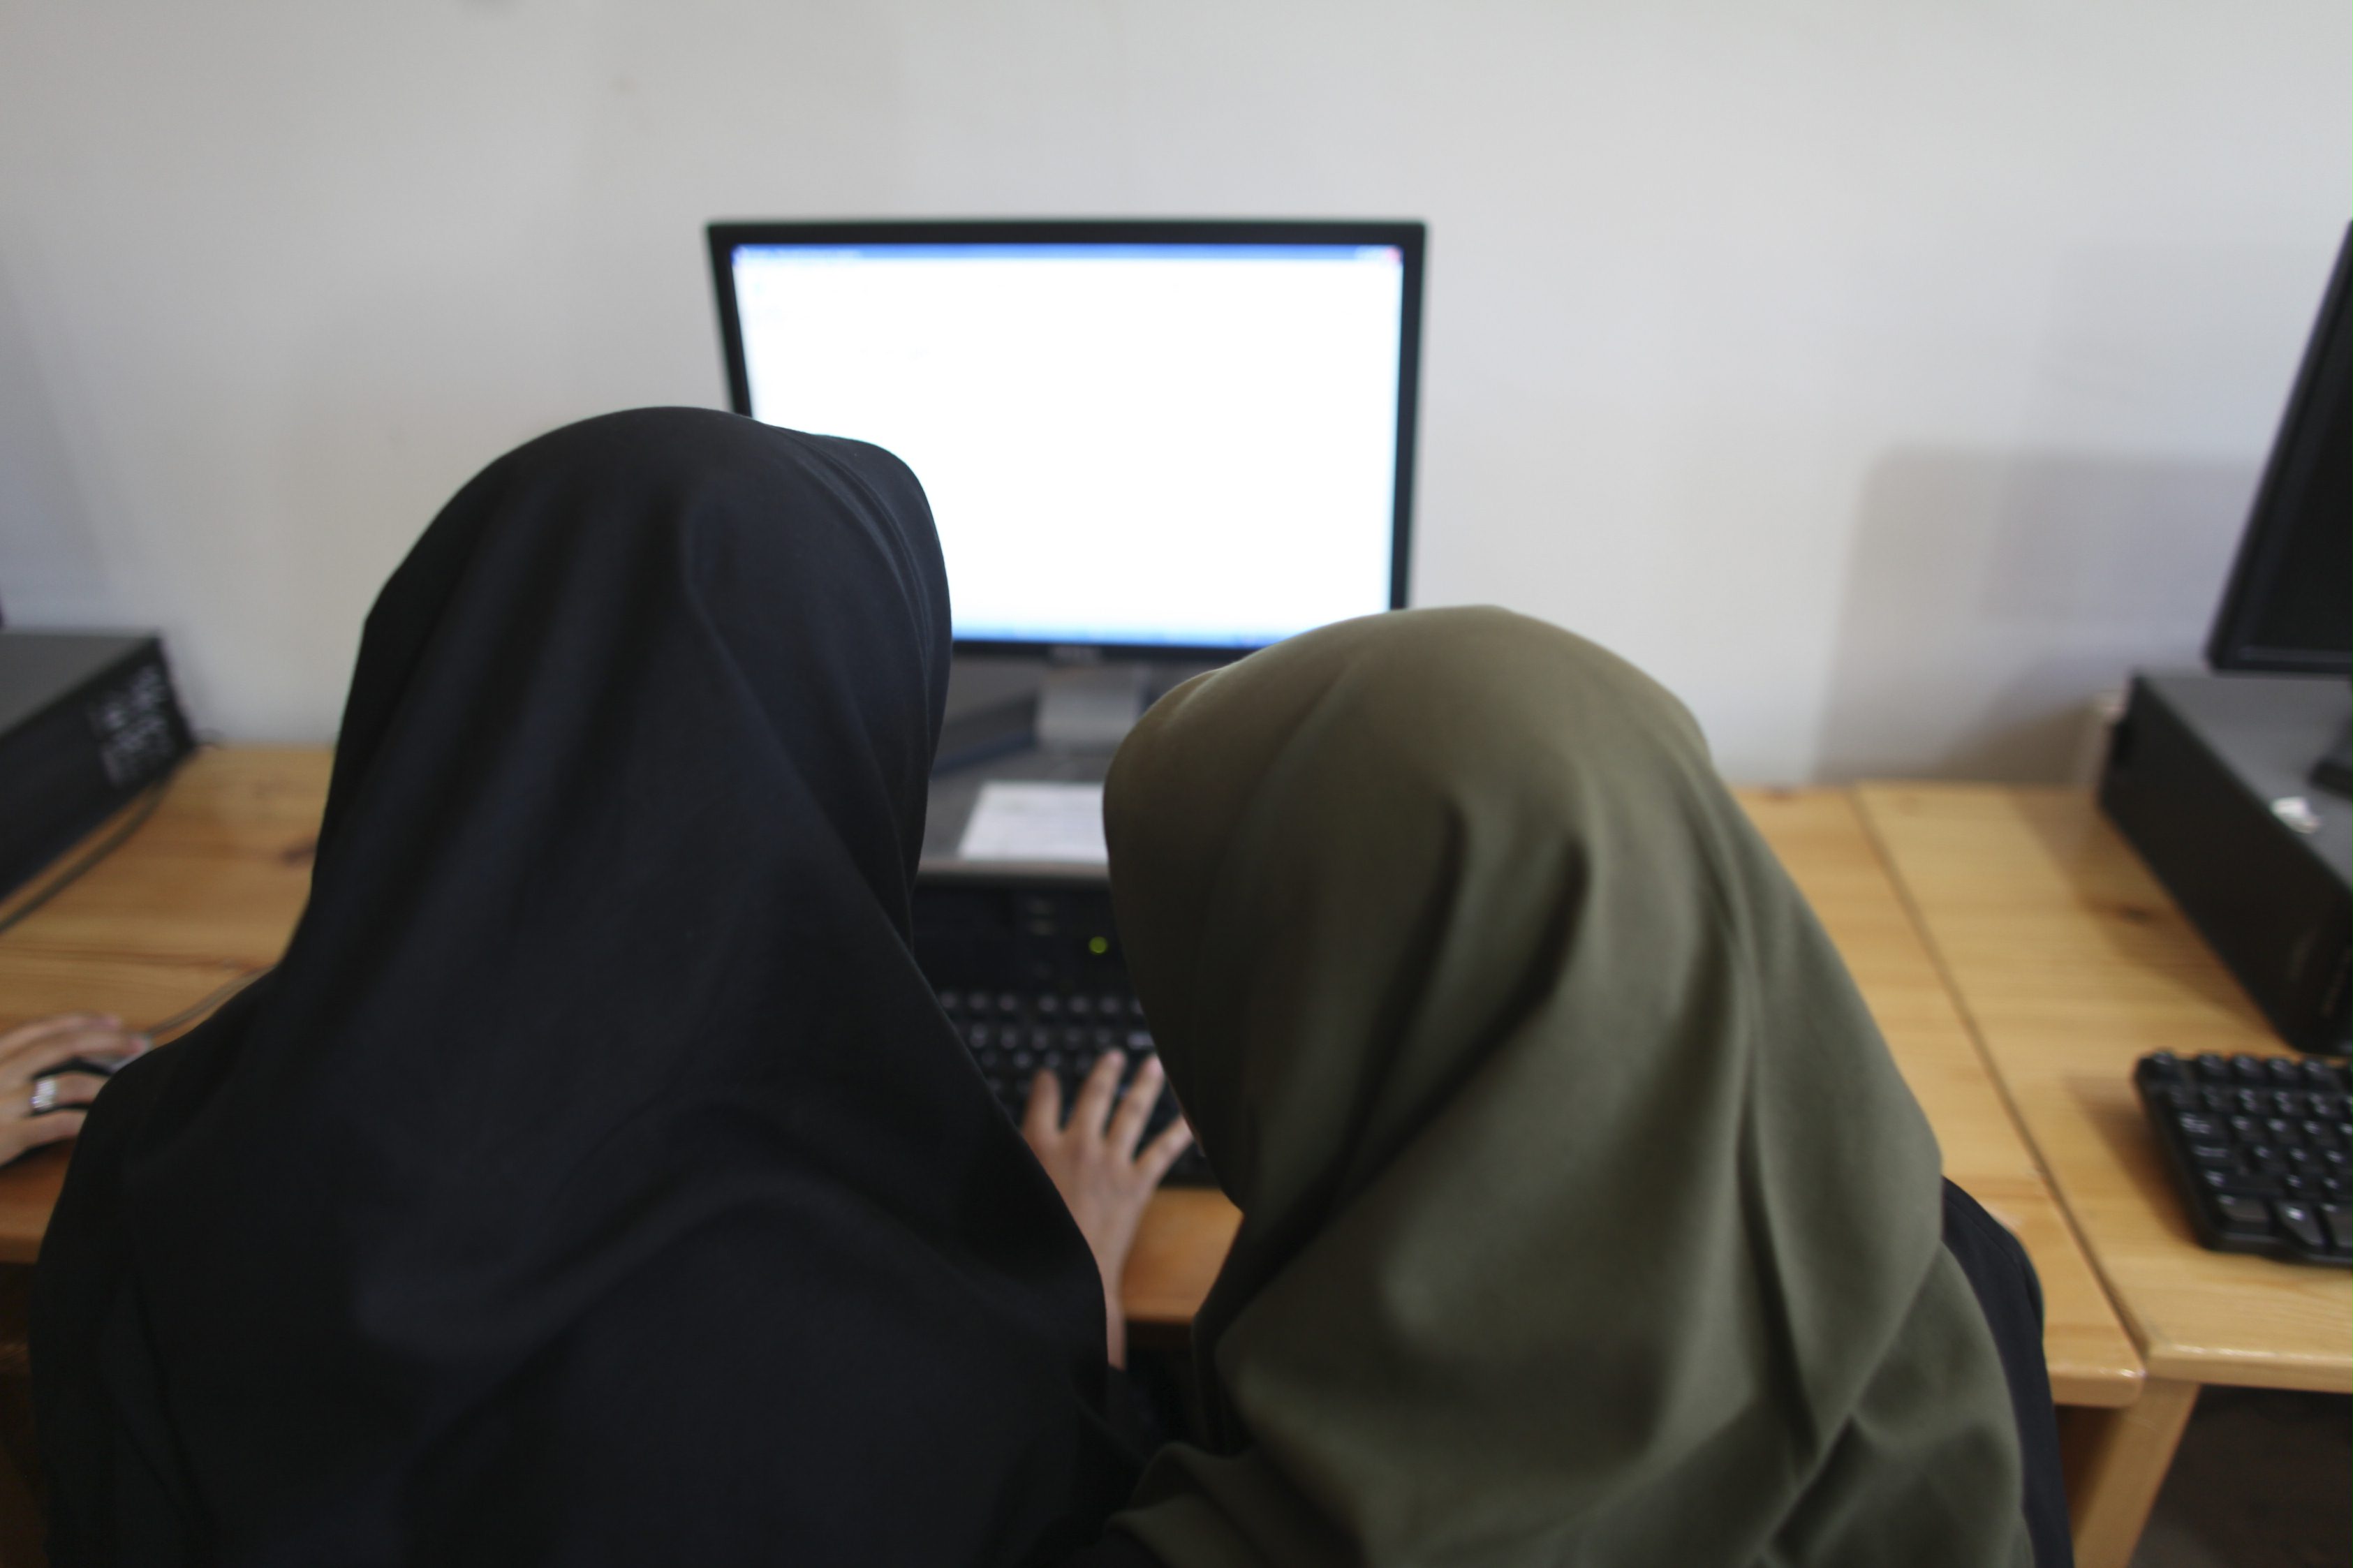 Two persons are facing a computer screen. They are wearing long scarfs.